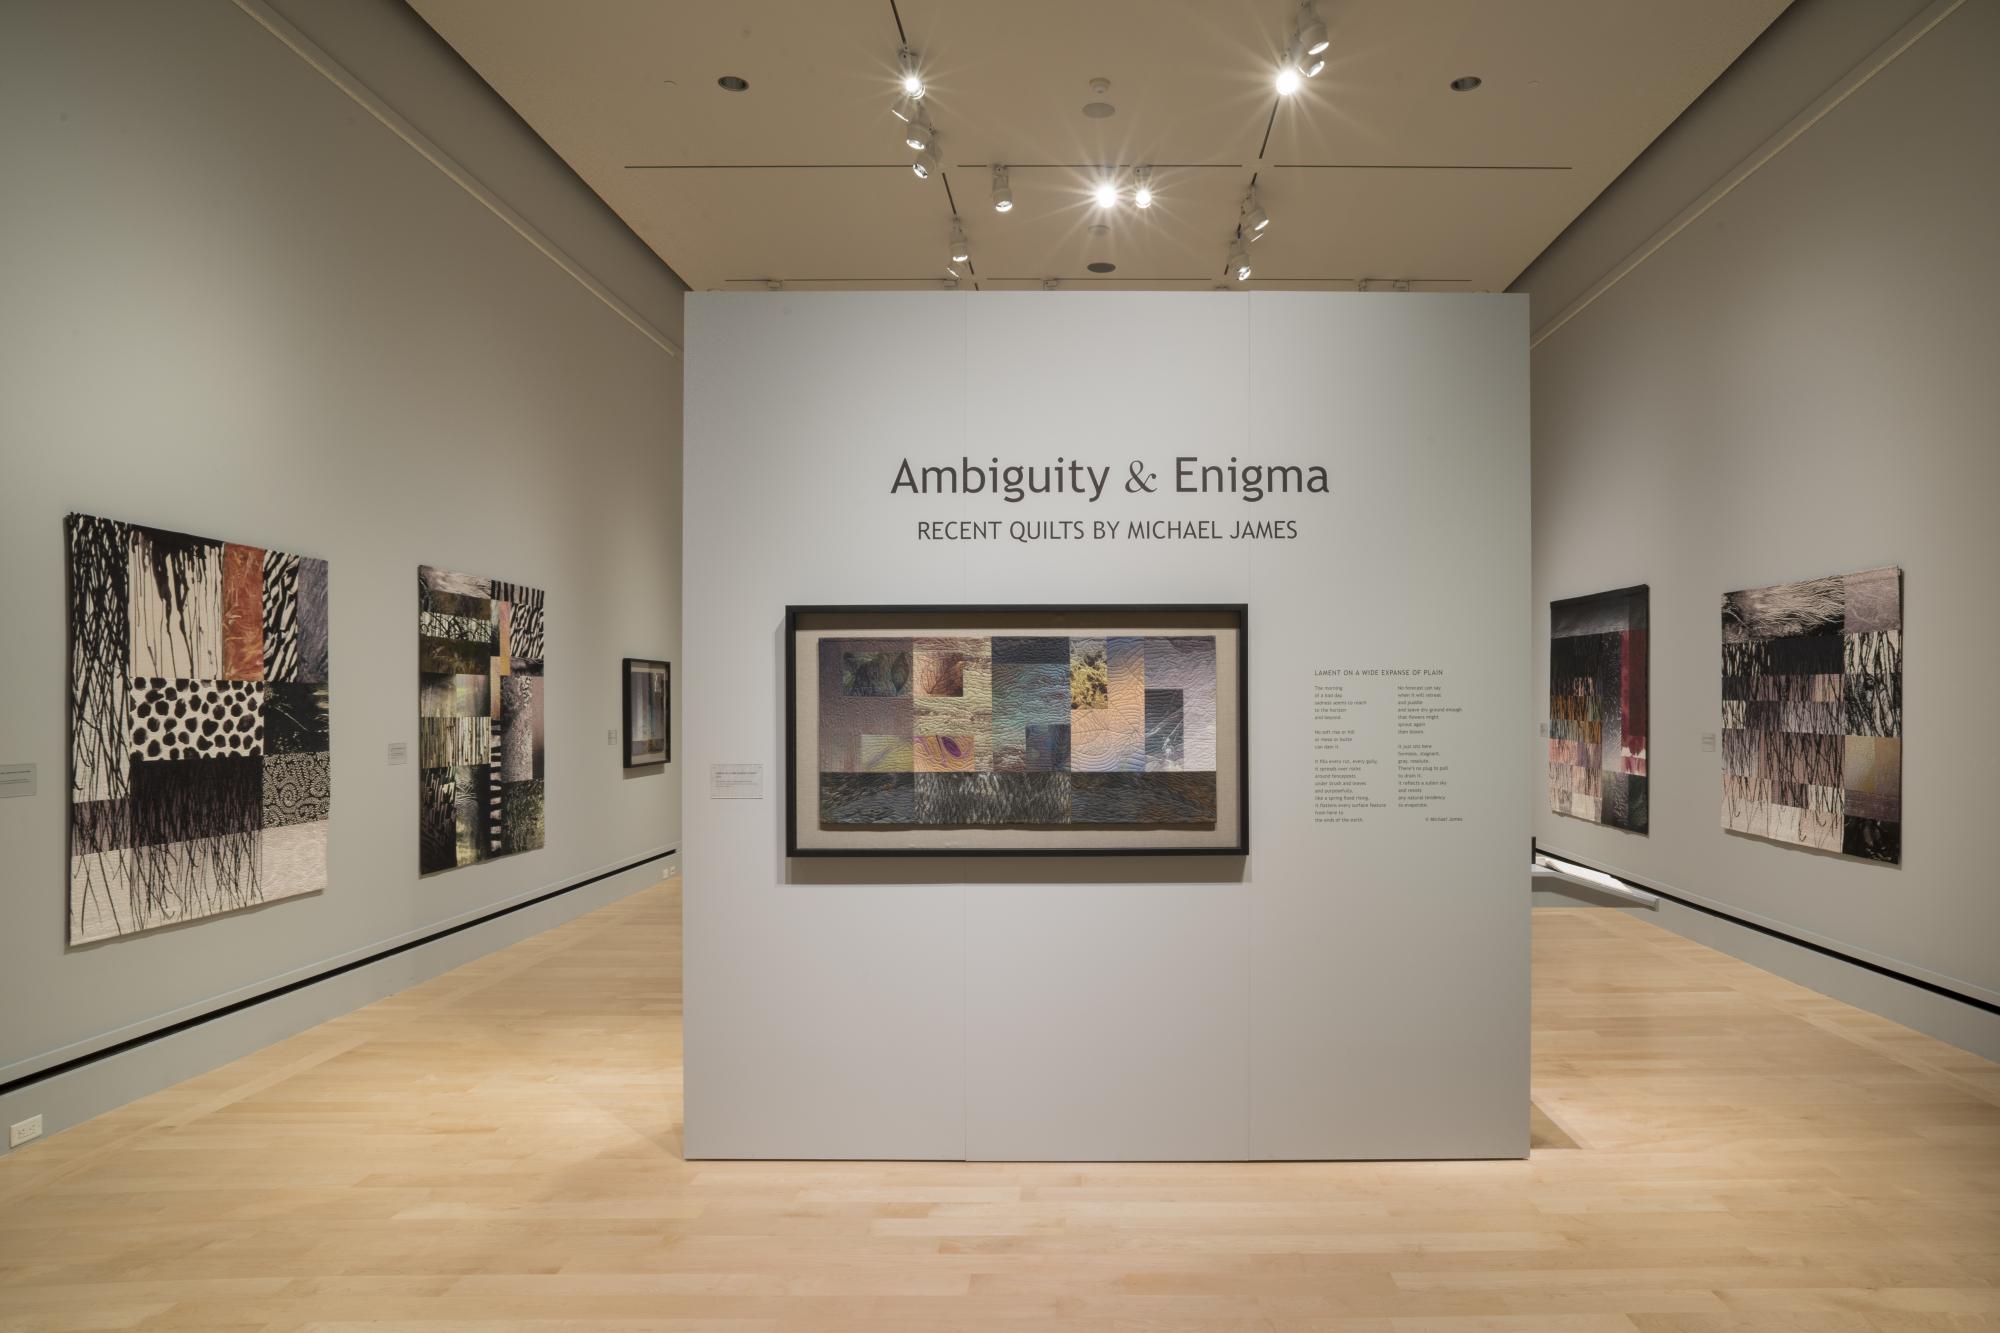 Ambiguity & Enigma: Recent Quilts by Michael James